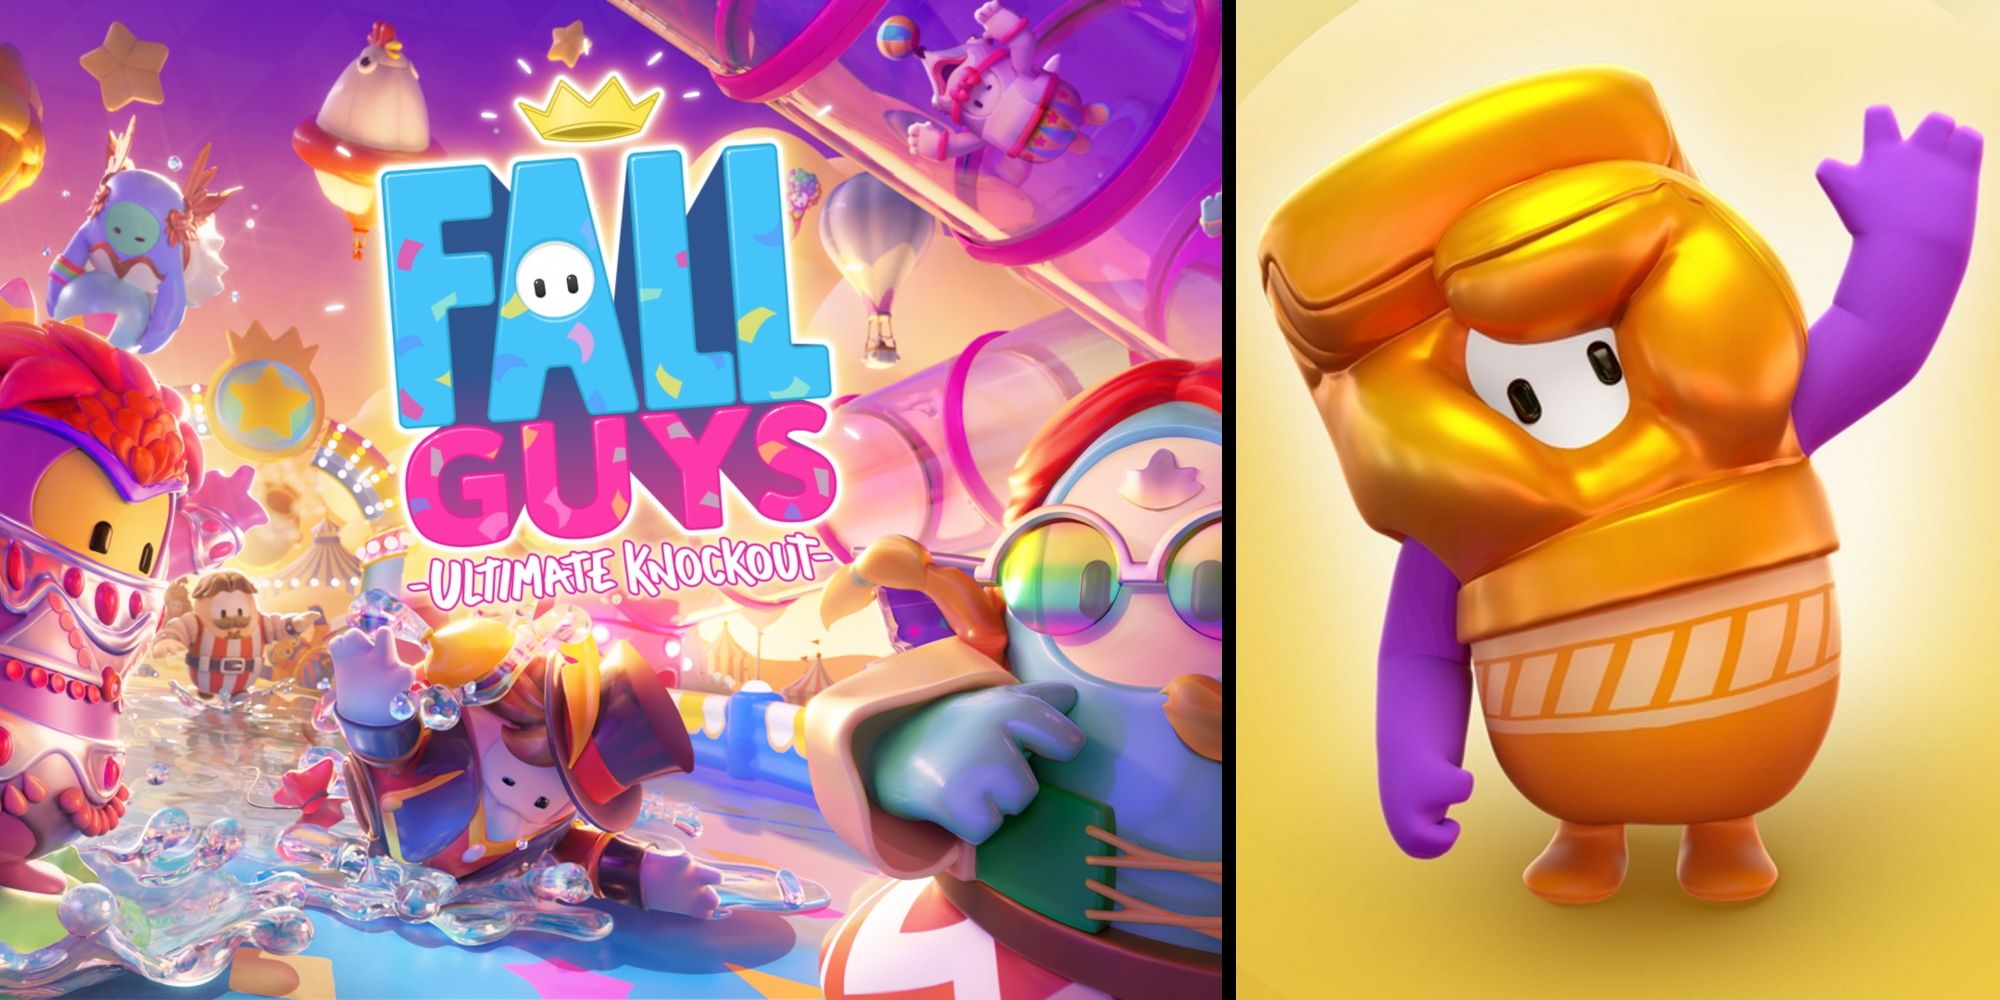 Fall Guys Title Image and Golden Punching Glove Costume